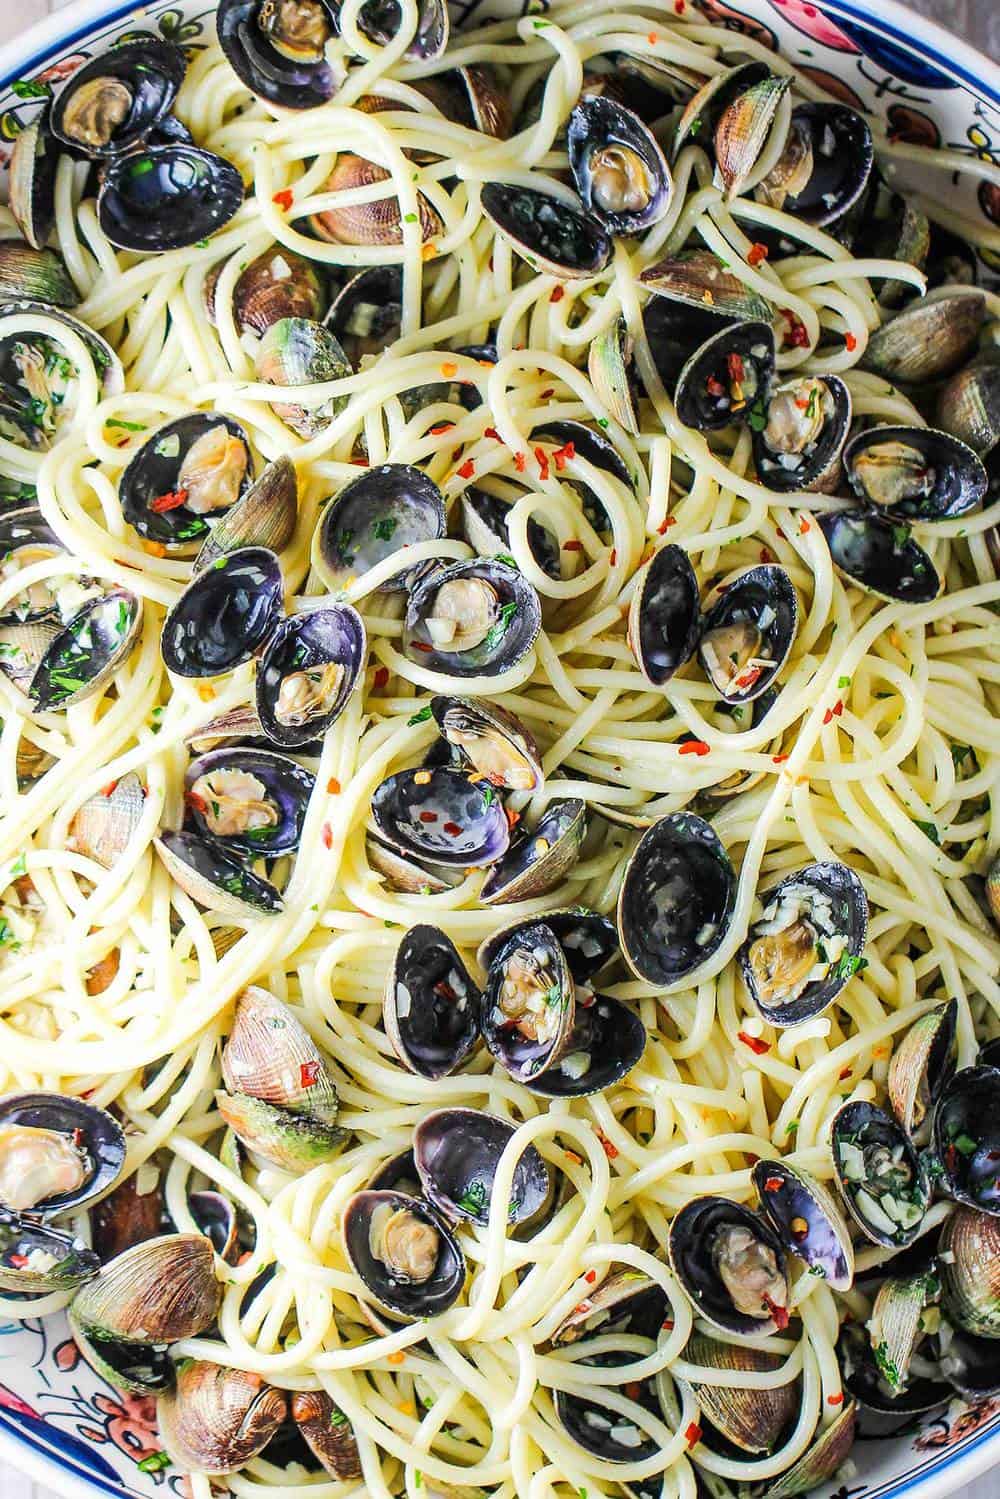 A large pasta bowl of cooked spaghetti vongole